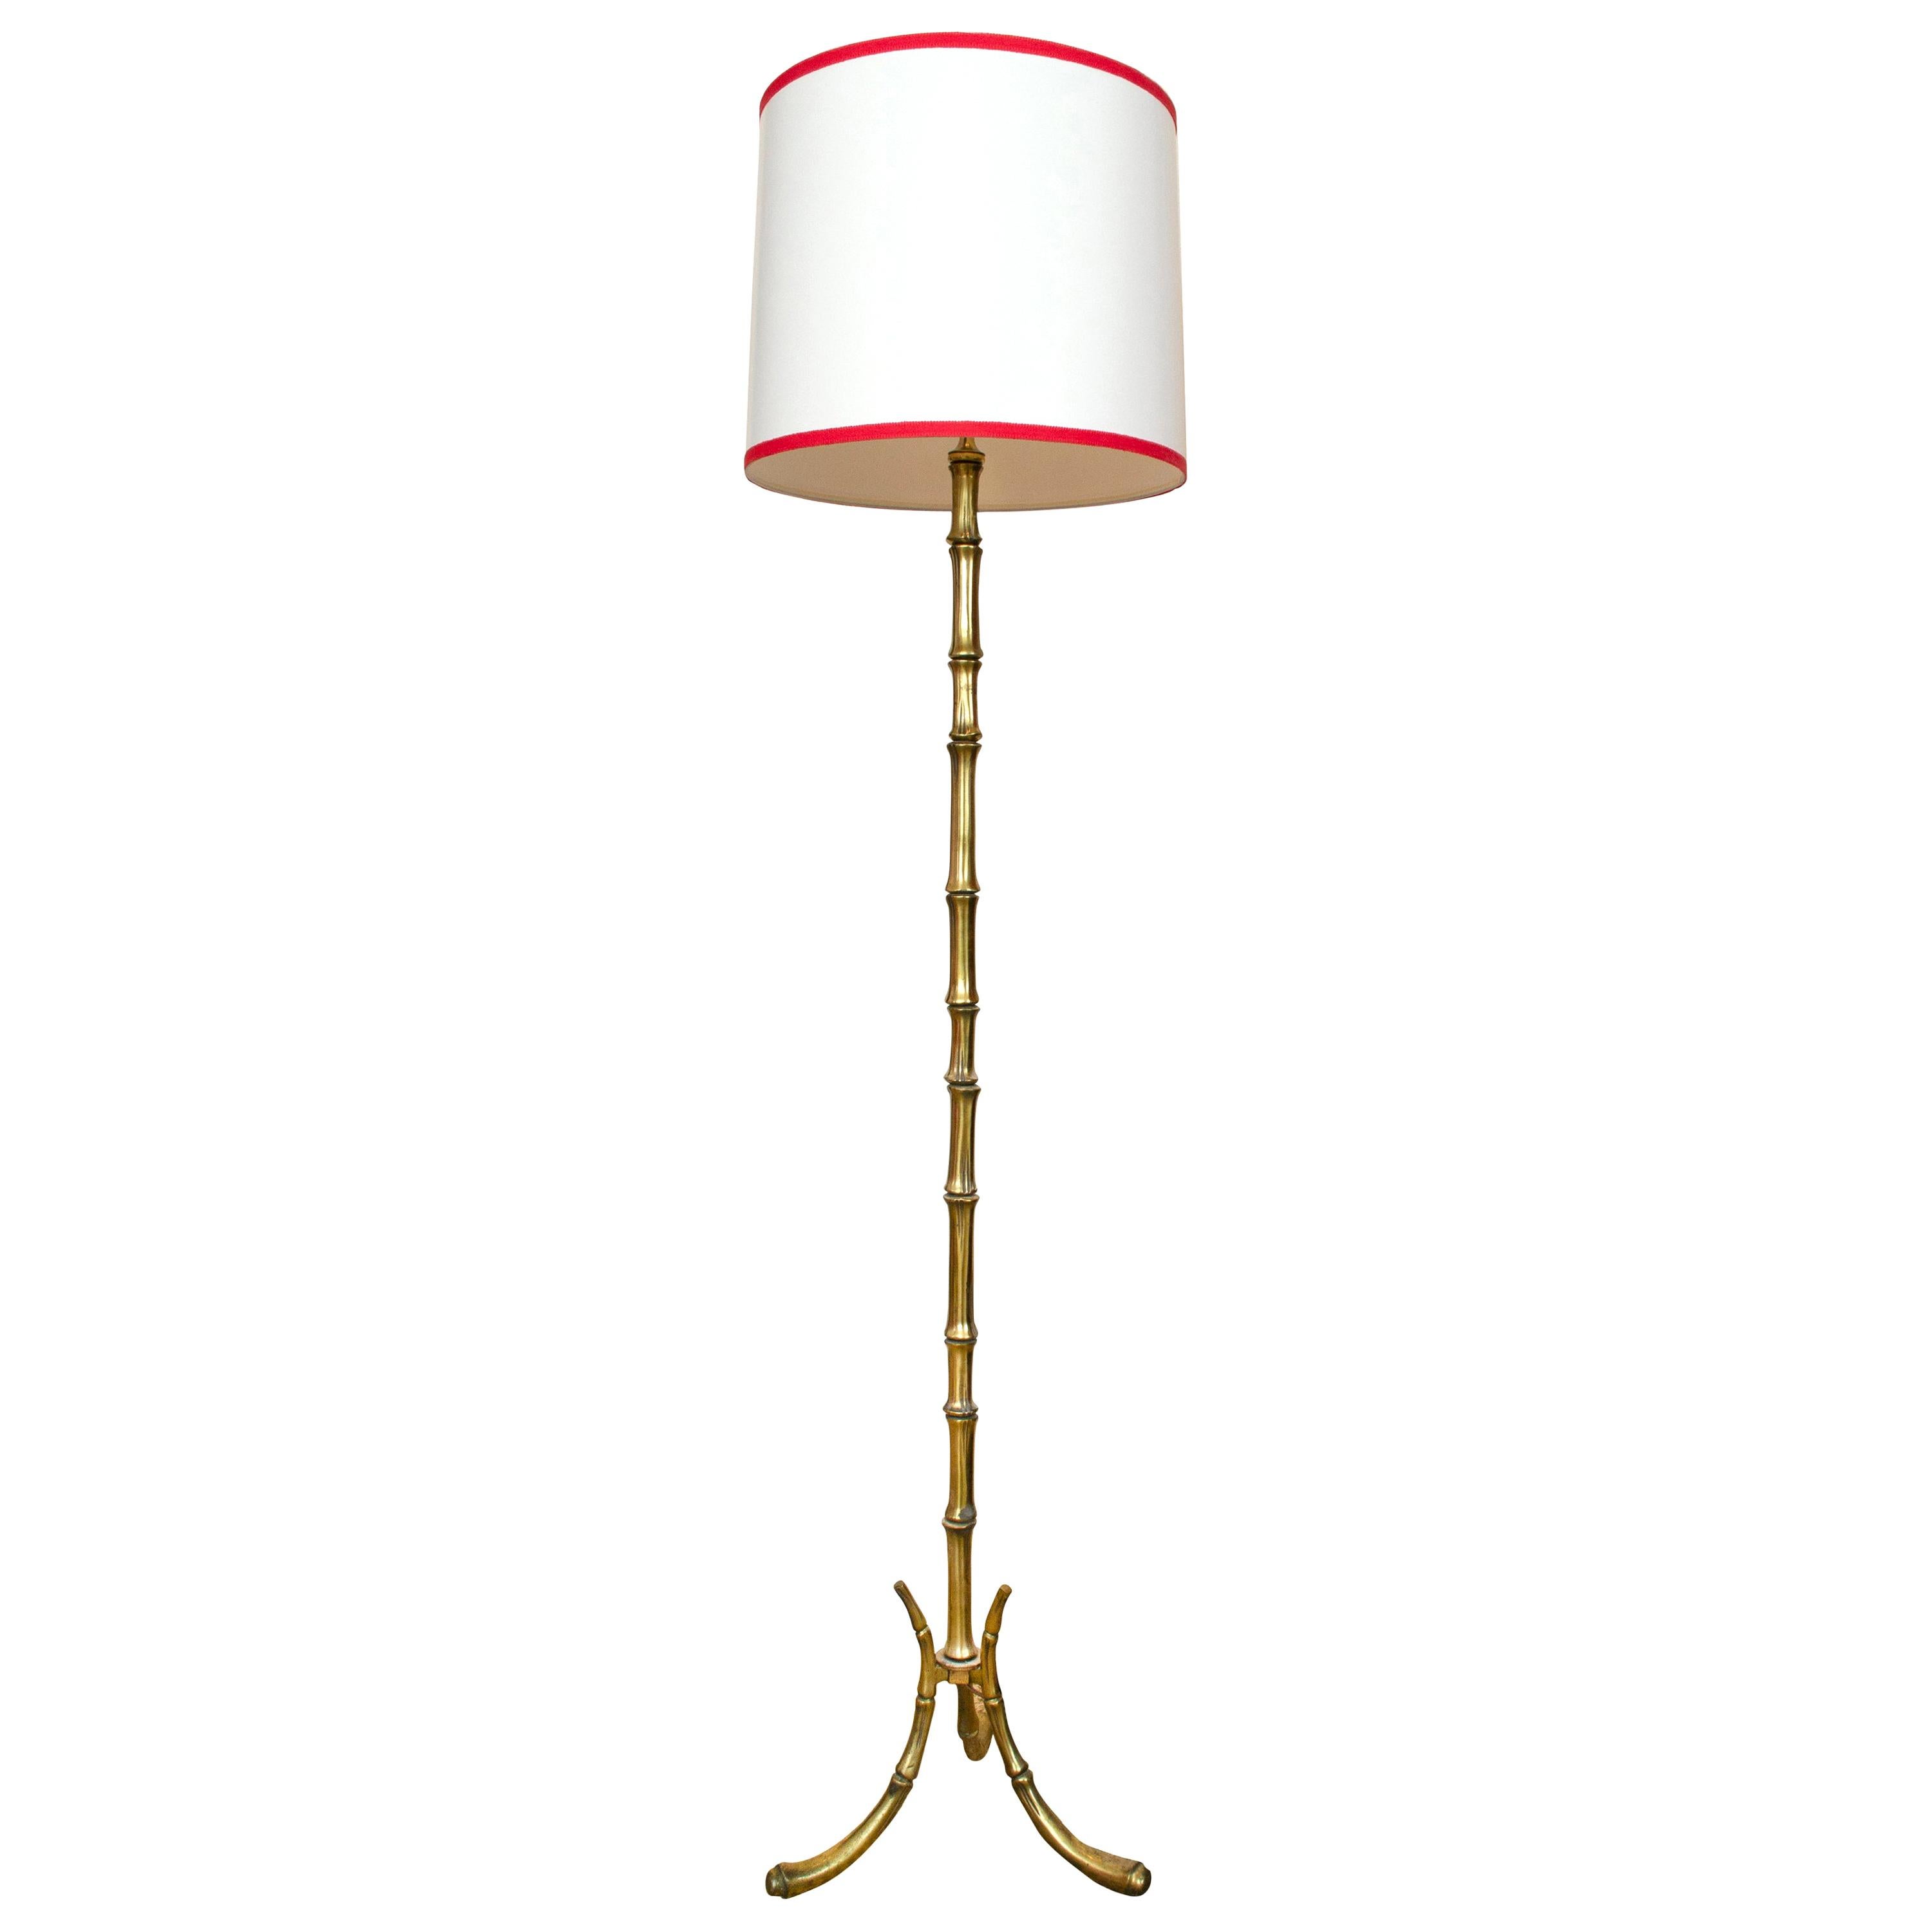 Mid-20th Century Brass Bamboo Standing Lamp by Maison Baguès